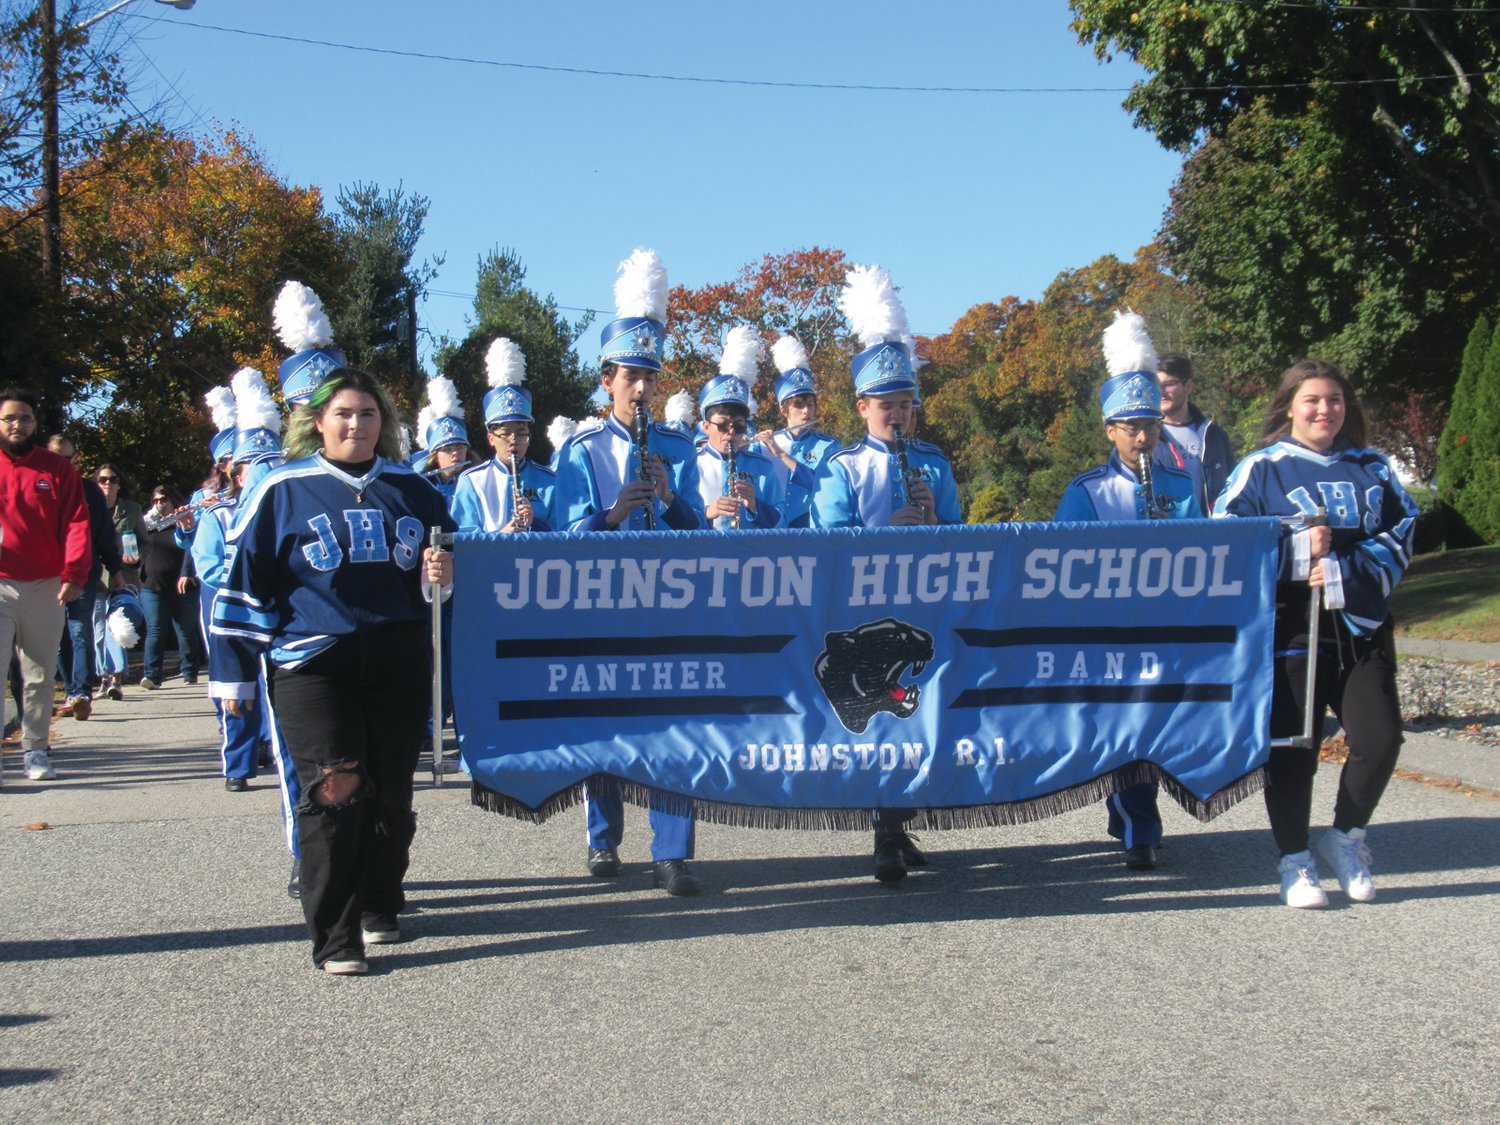 TALENTED TROUPE: In keeping with tradition, the national award-winning JHS marching put on another prolific performance in Saturday’s Homecoming Parade.